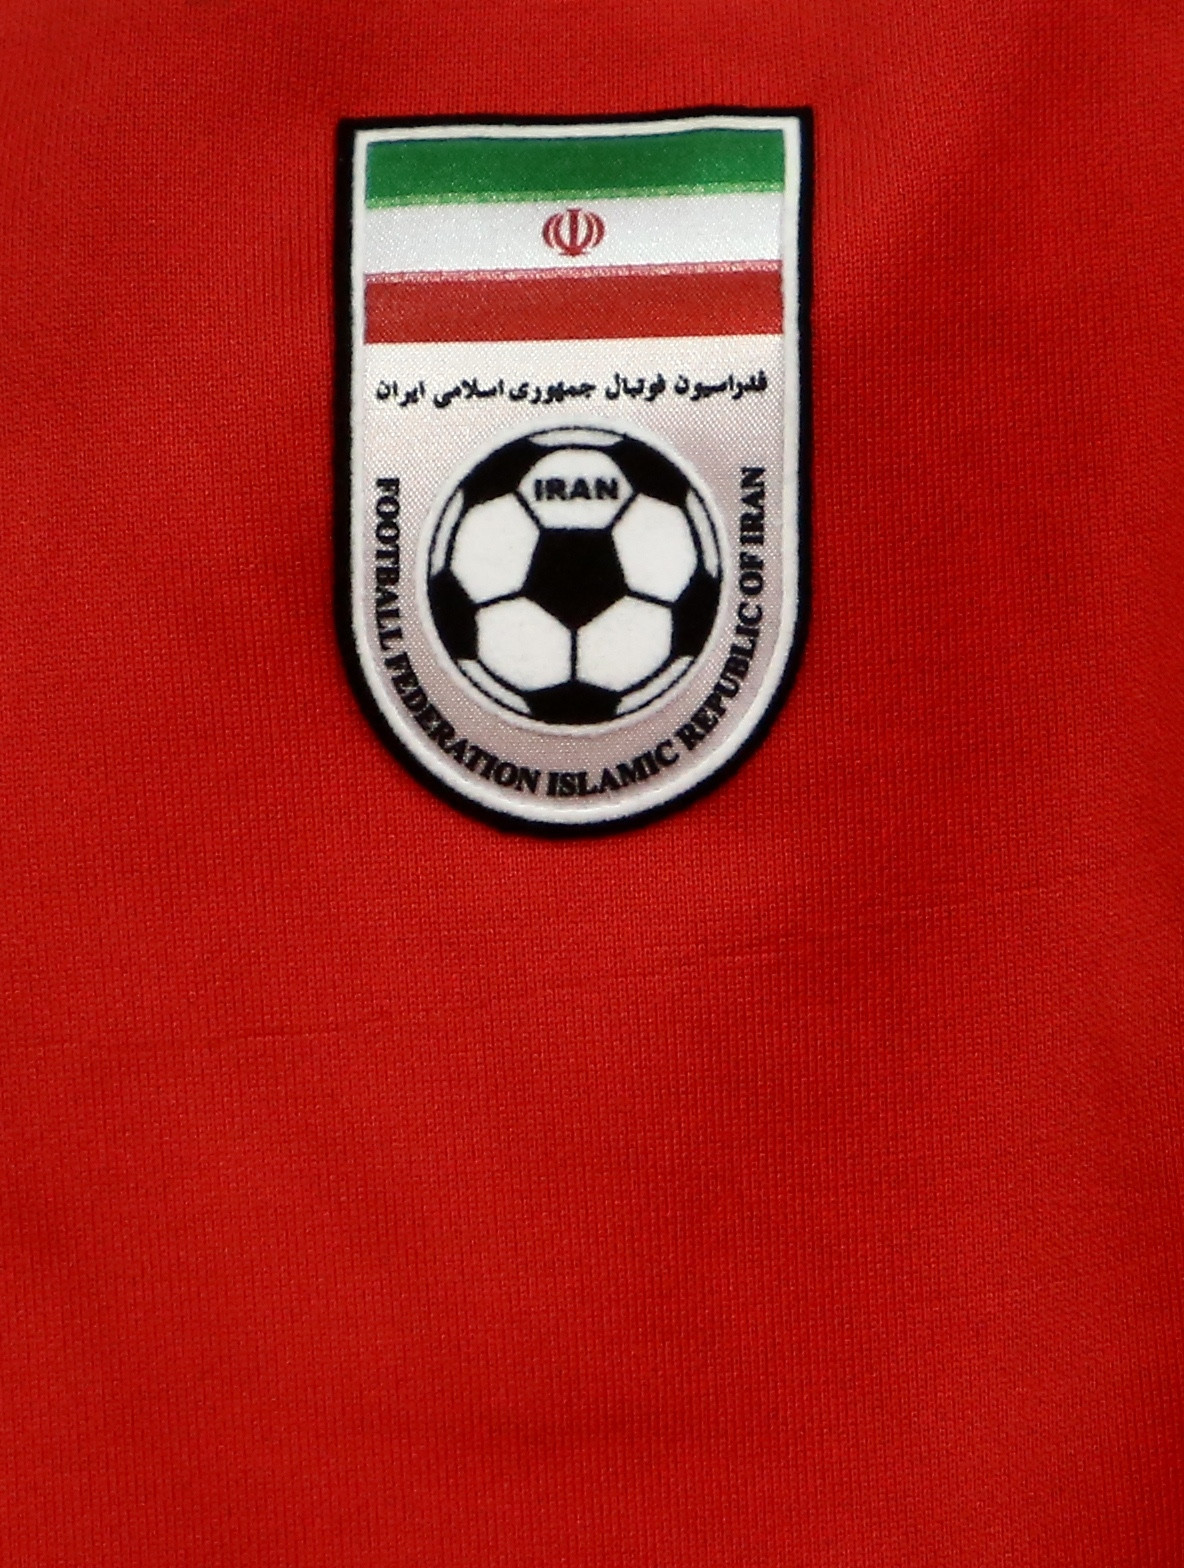 The Football Federation Islamic Republic of Iran has been ordered to postpone its elections ©Getty Images